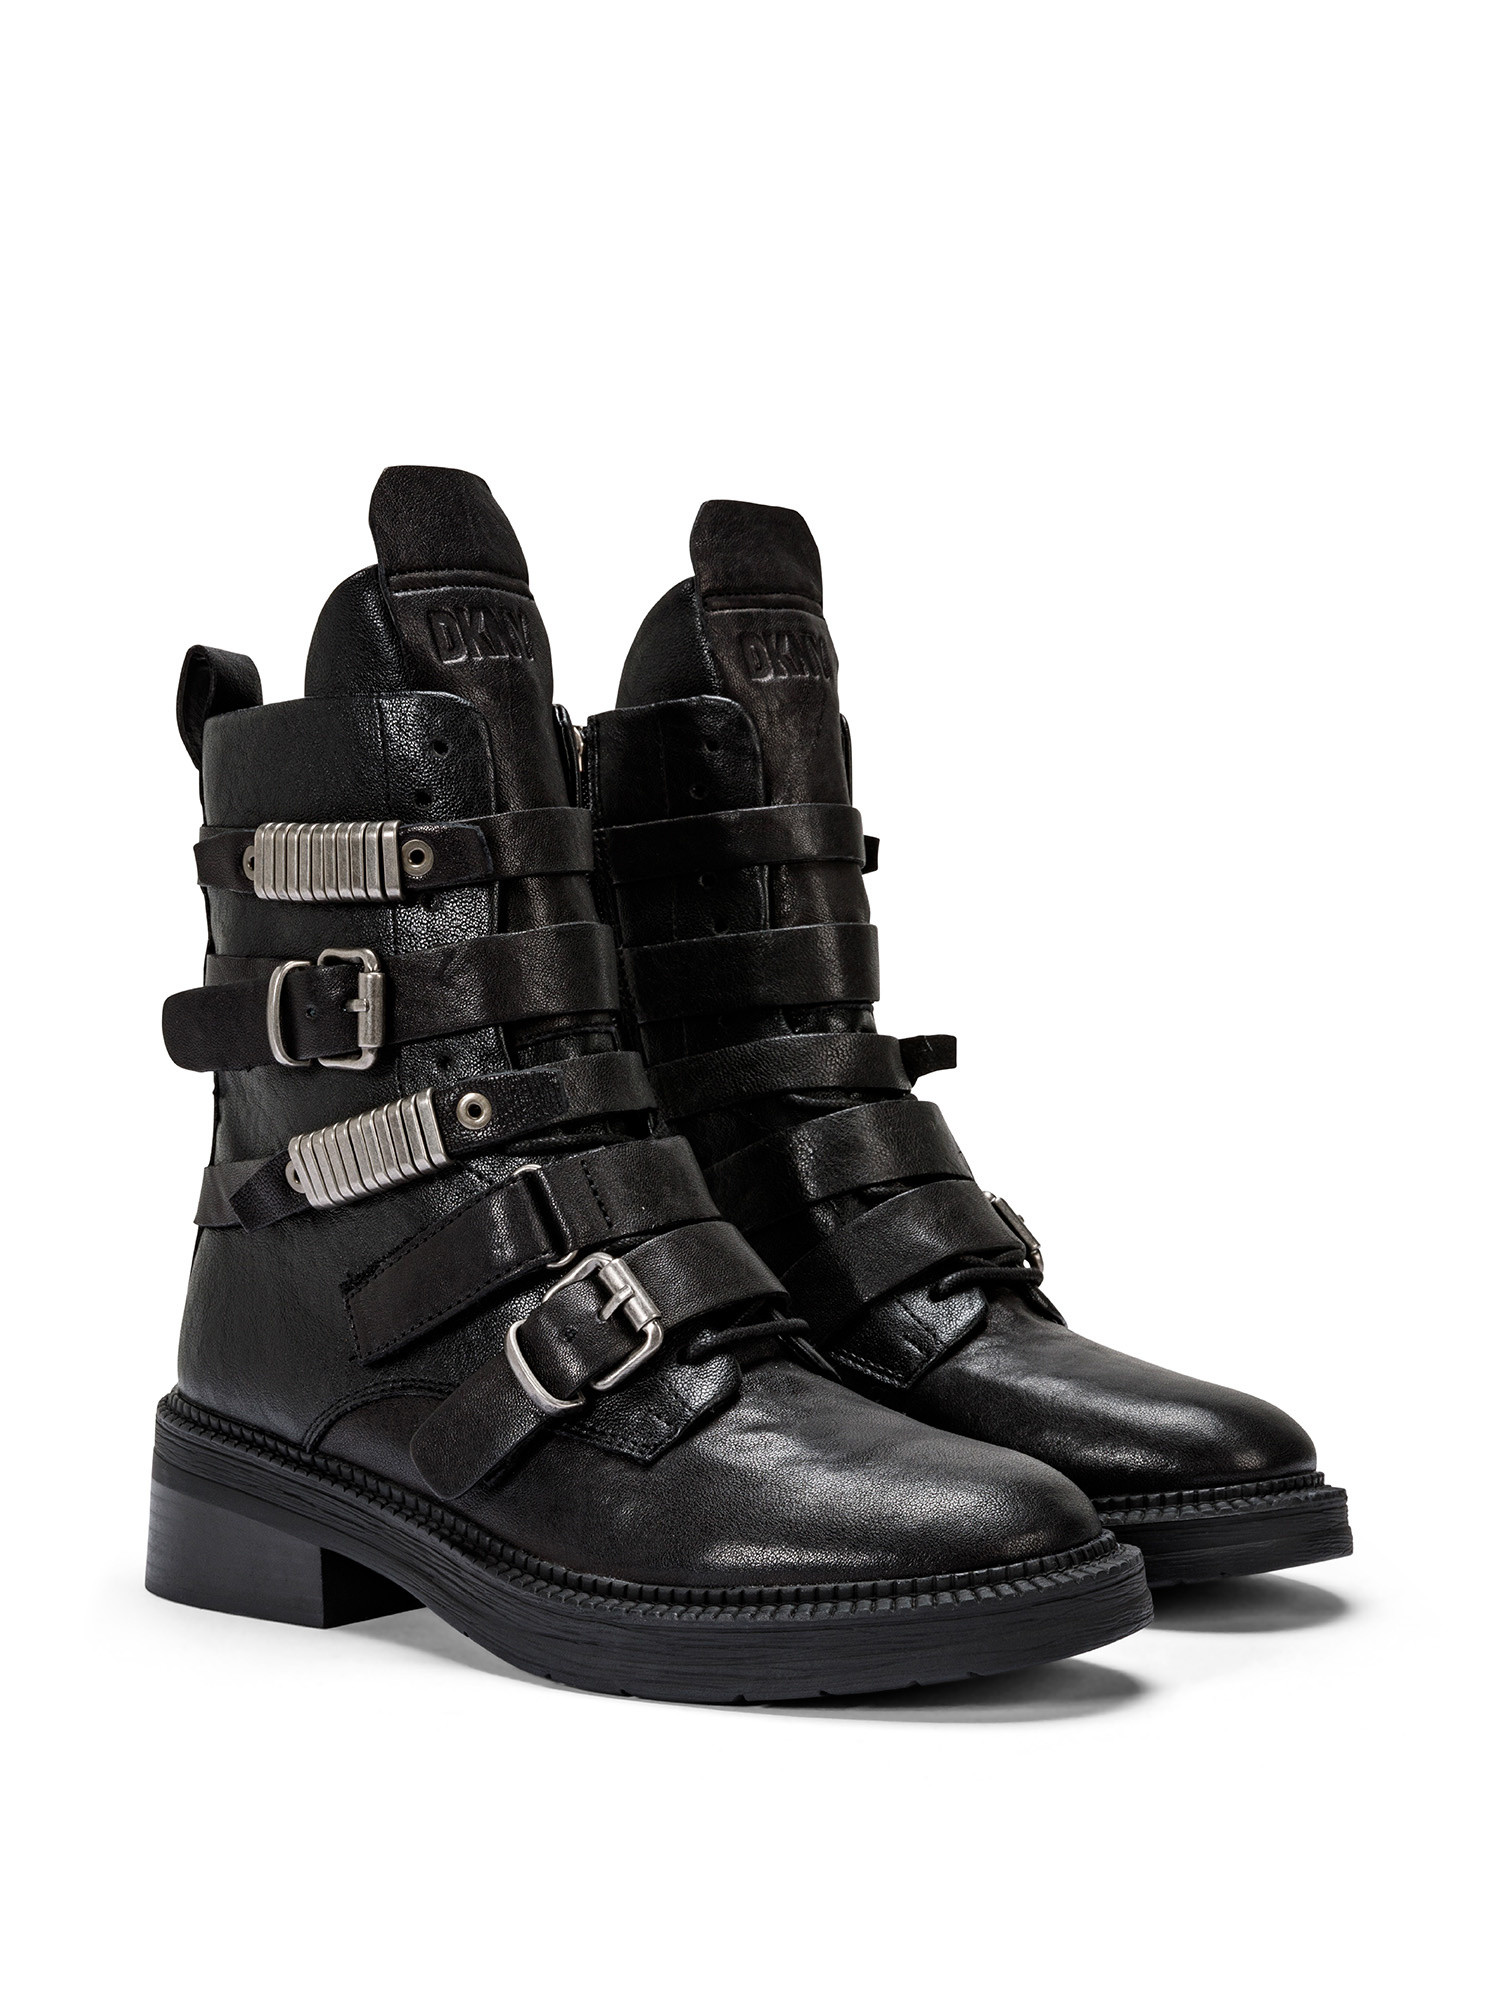 DKNY - Lace up ankle boots, Black, large image number 1